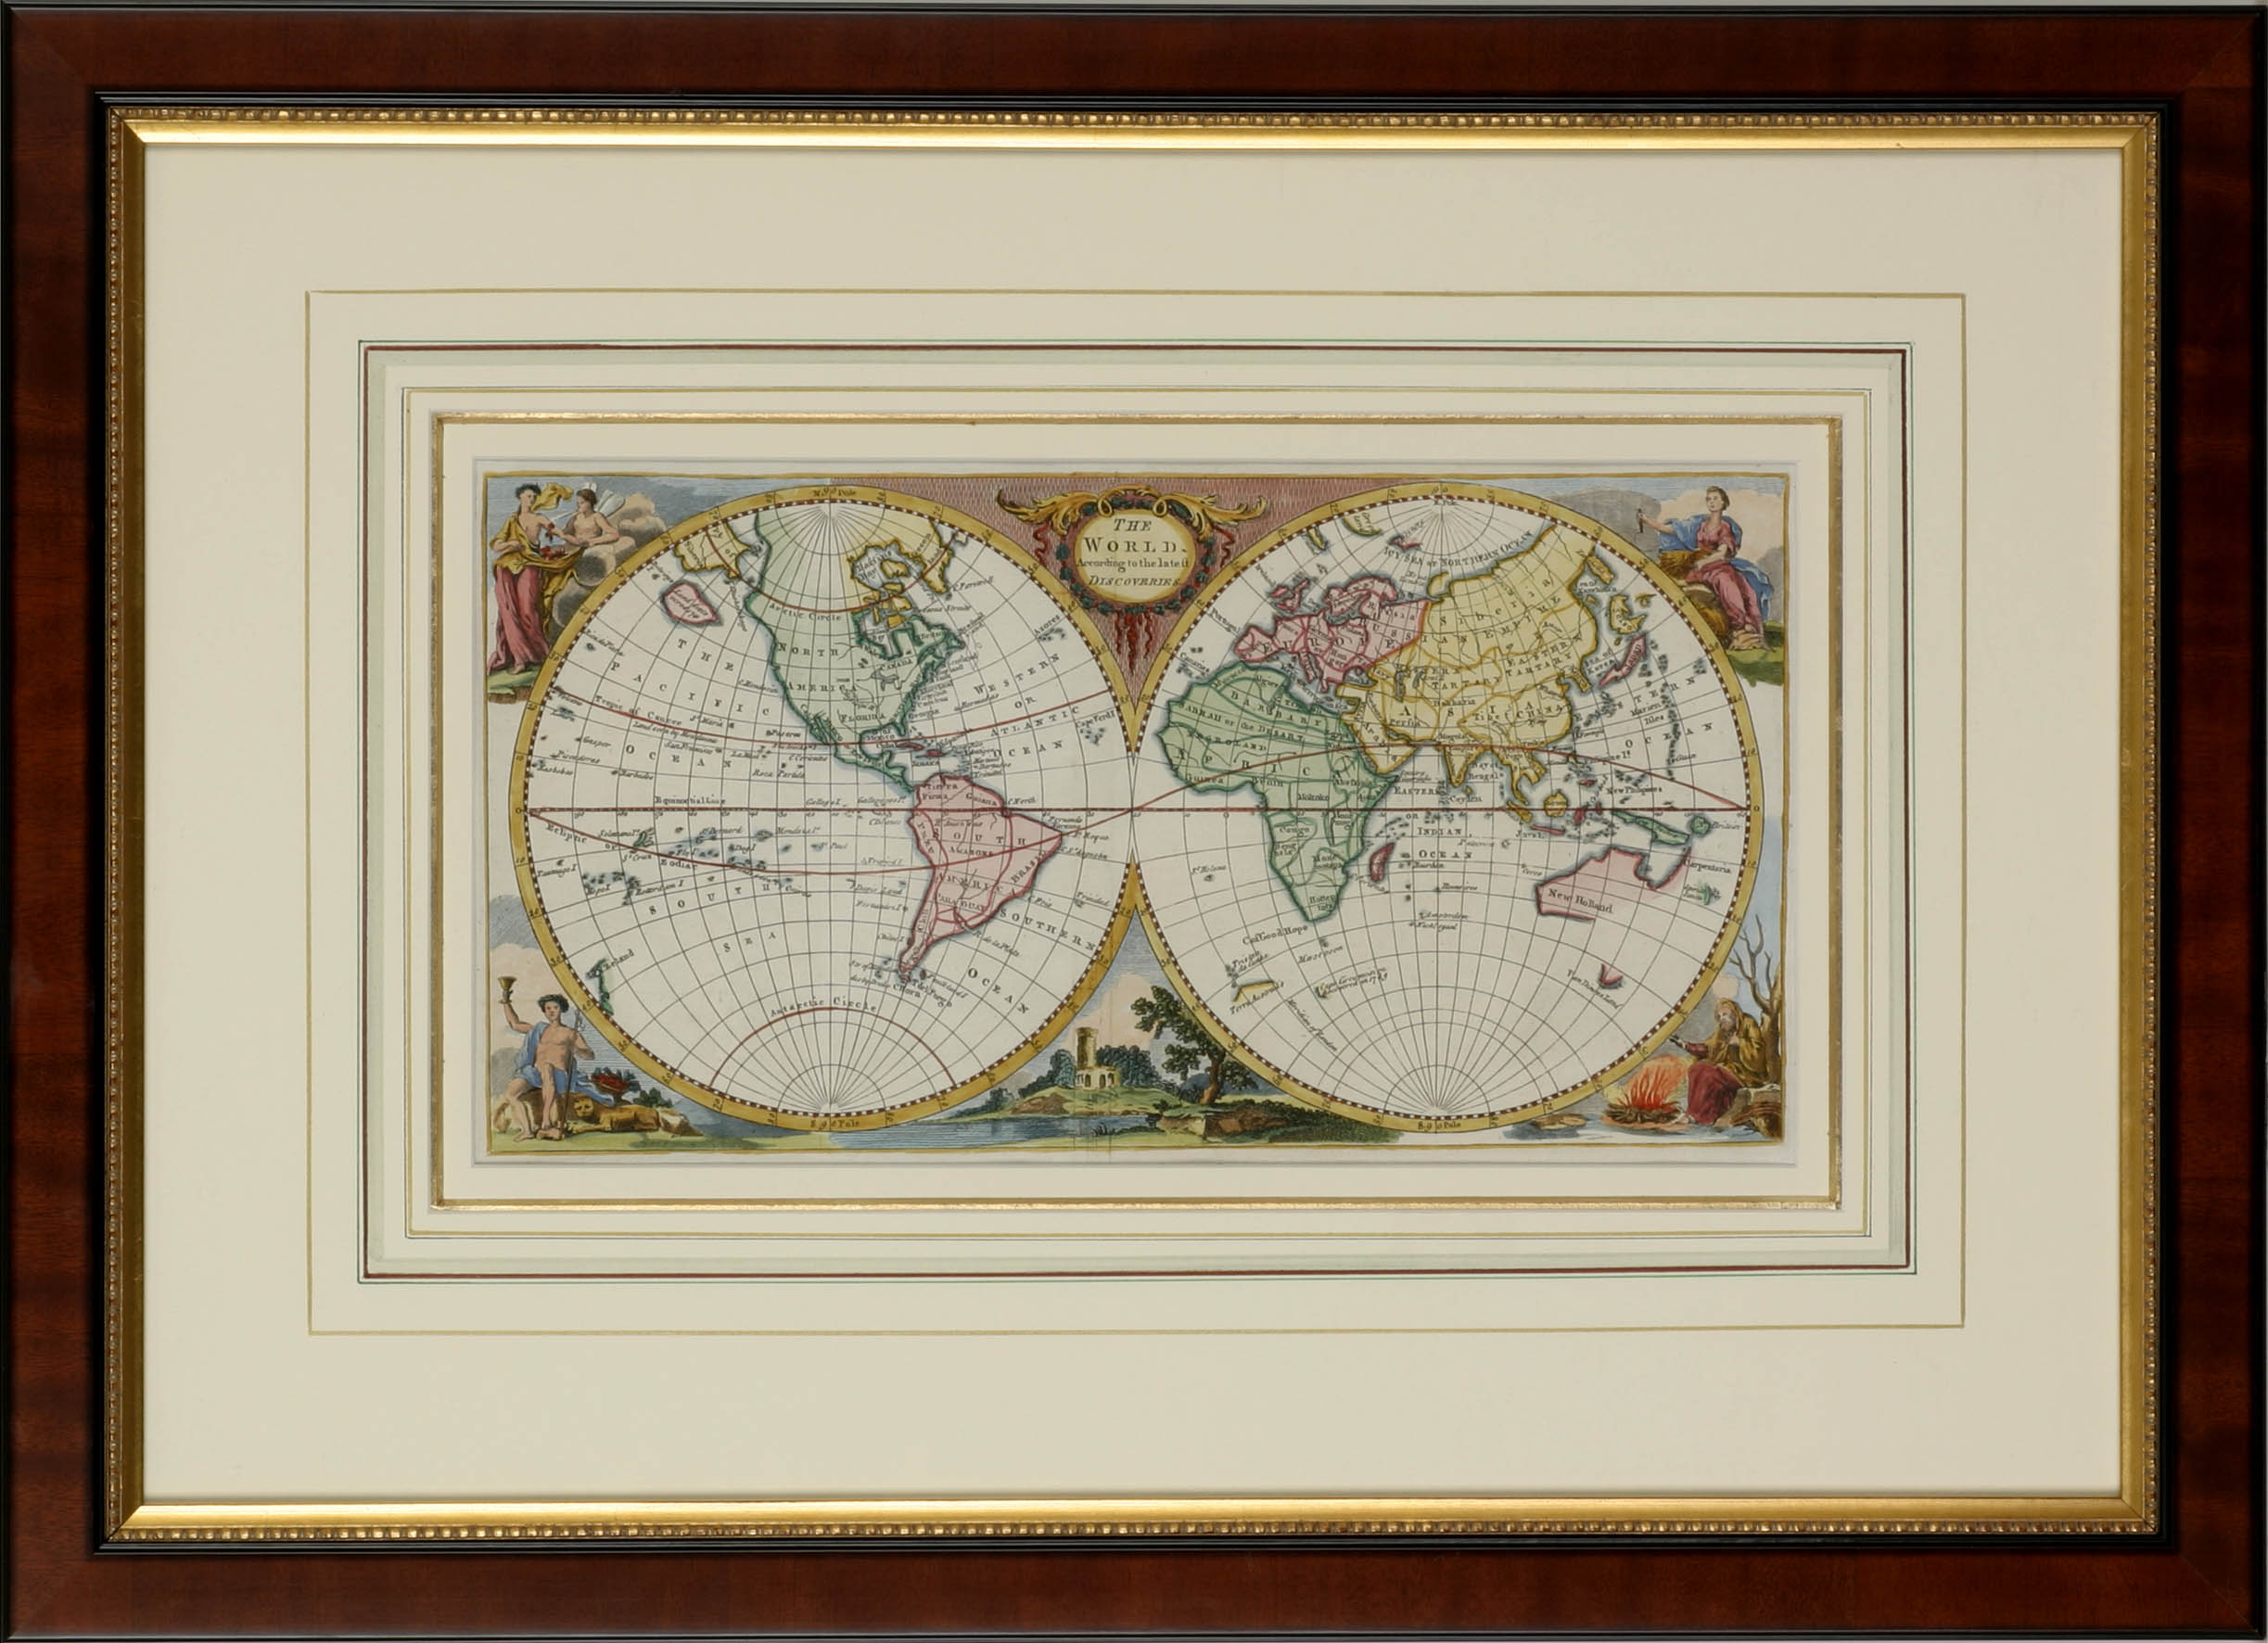 The World According to the Latest Discoveries. - Antique Print from 1744